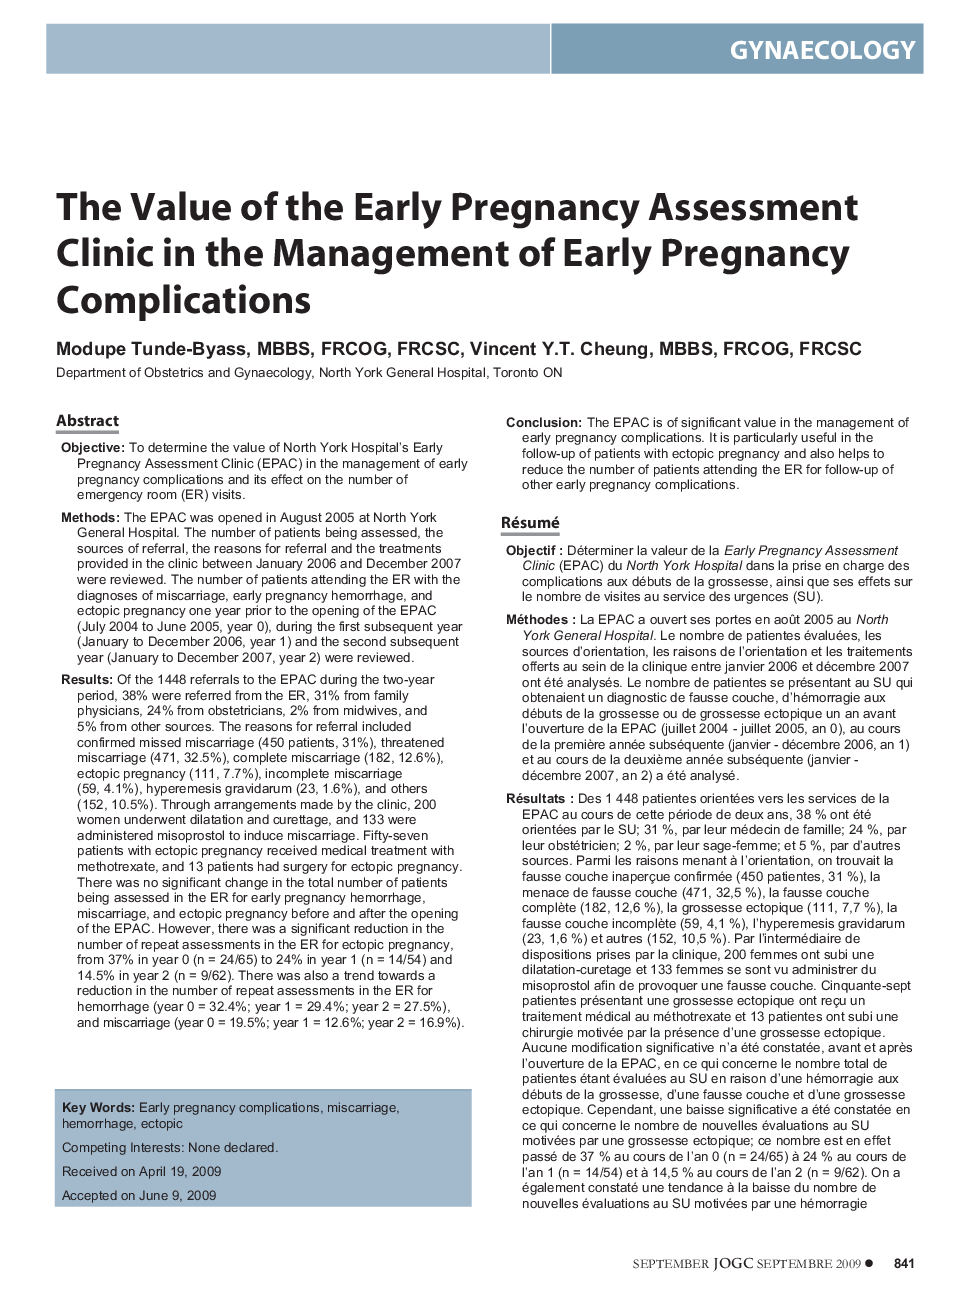 The Value of the Early Pregnancy Assessment Clinic in the Management of Early Pregnancy Complications